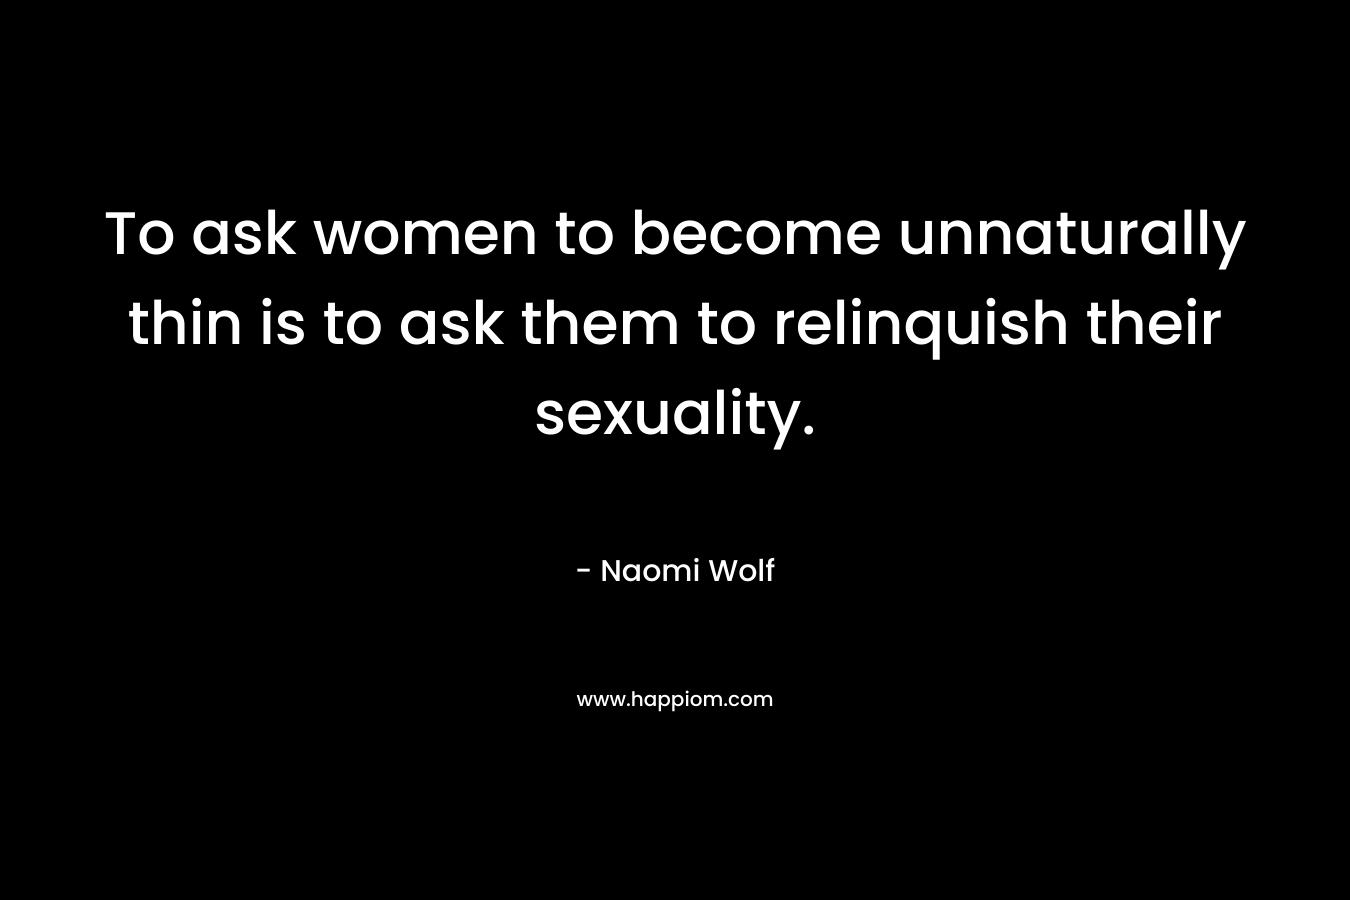 To ask women to become unnaturally thin is to ask them to relinquish their sexuality.